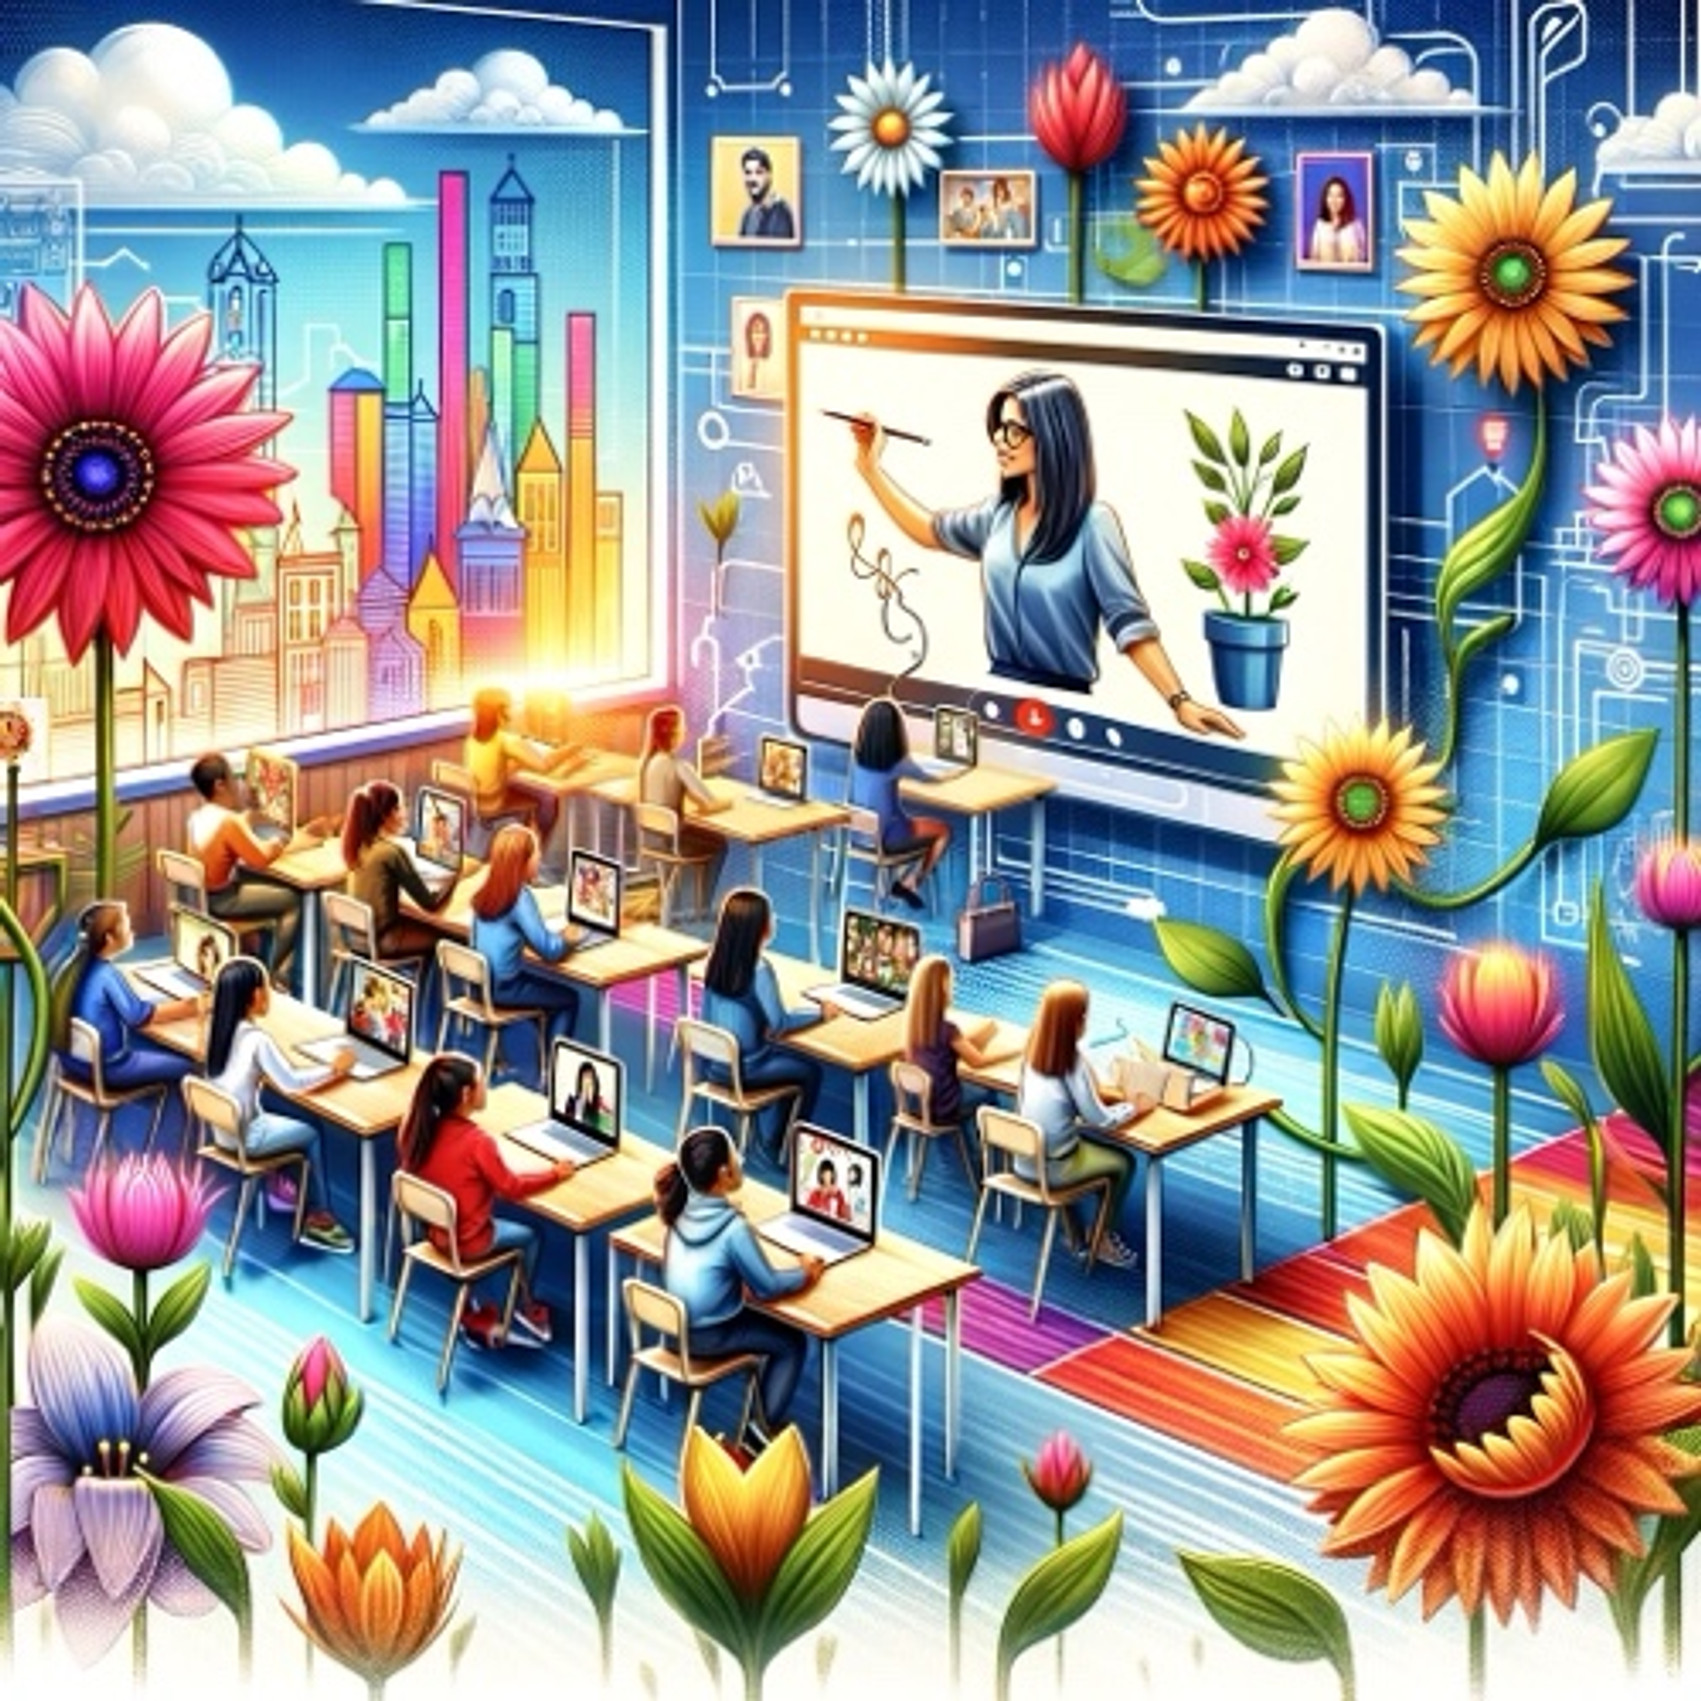 Beyond Meetings: Creative Uses of Video Conferencing Technology in Education and Training